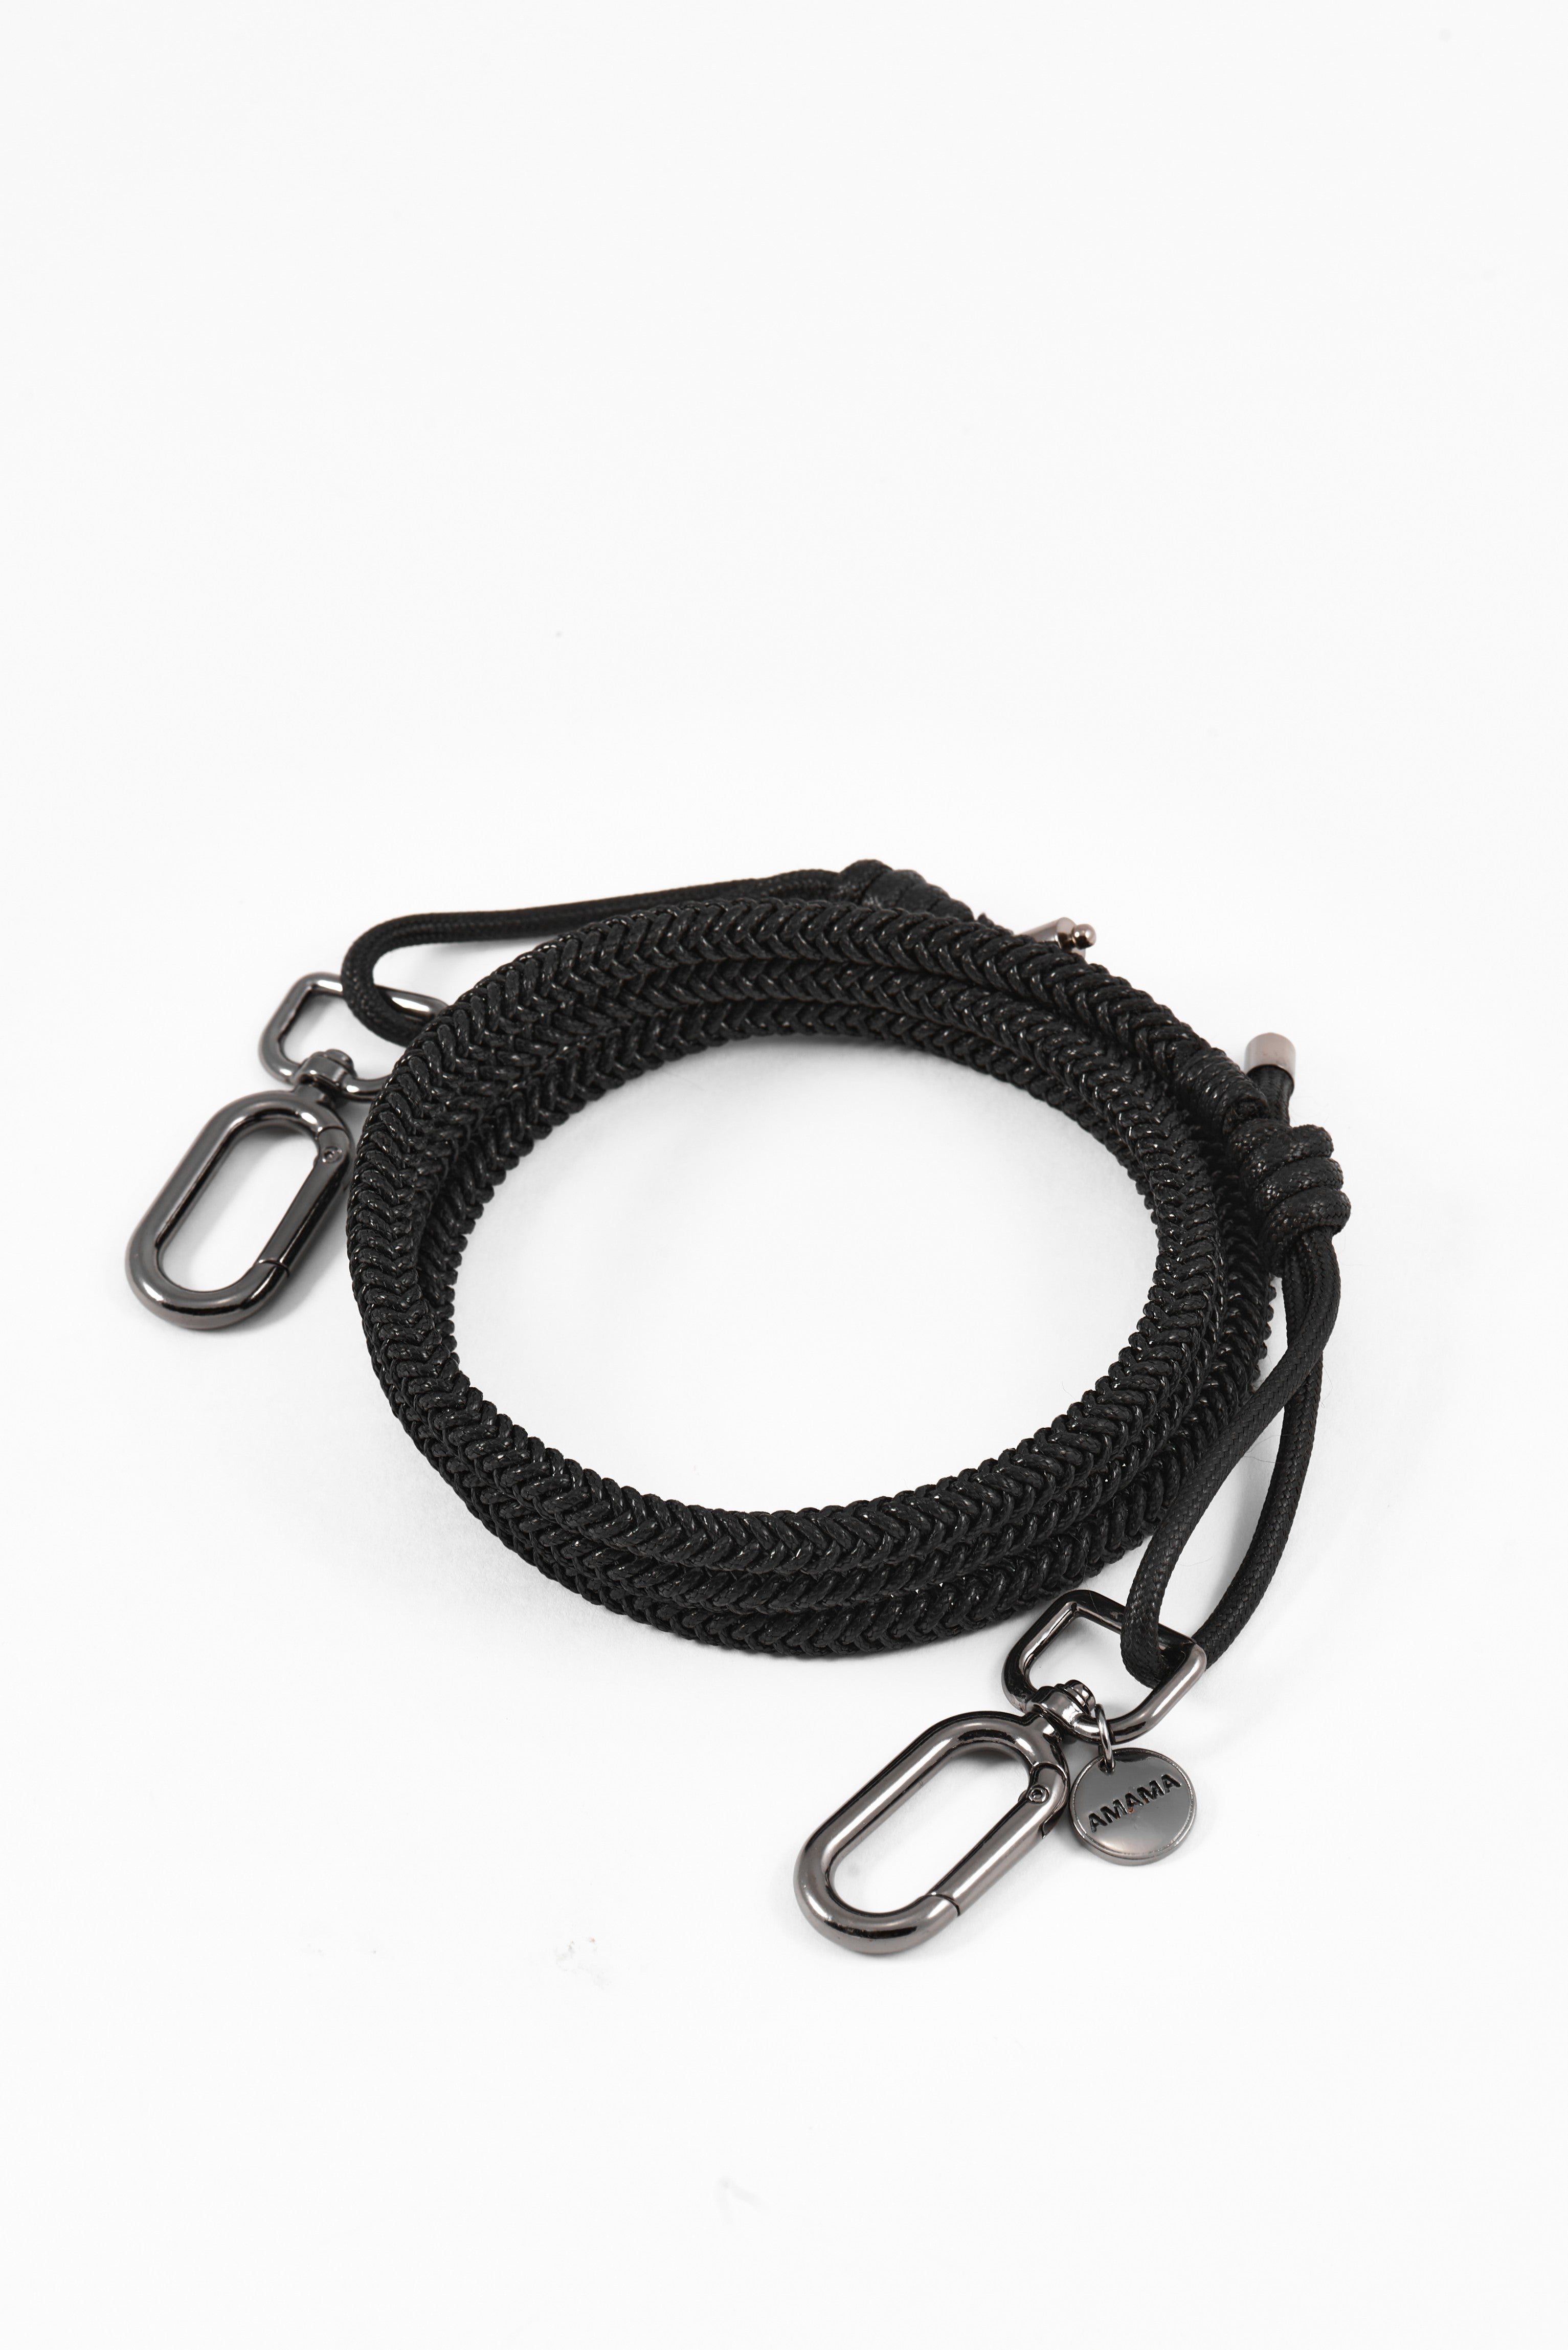 Amama,Orb cord in Jet Black